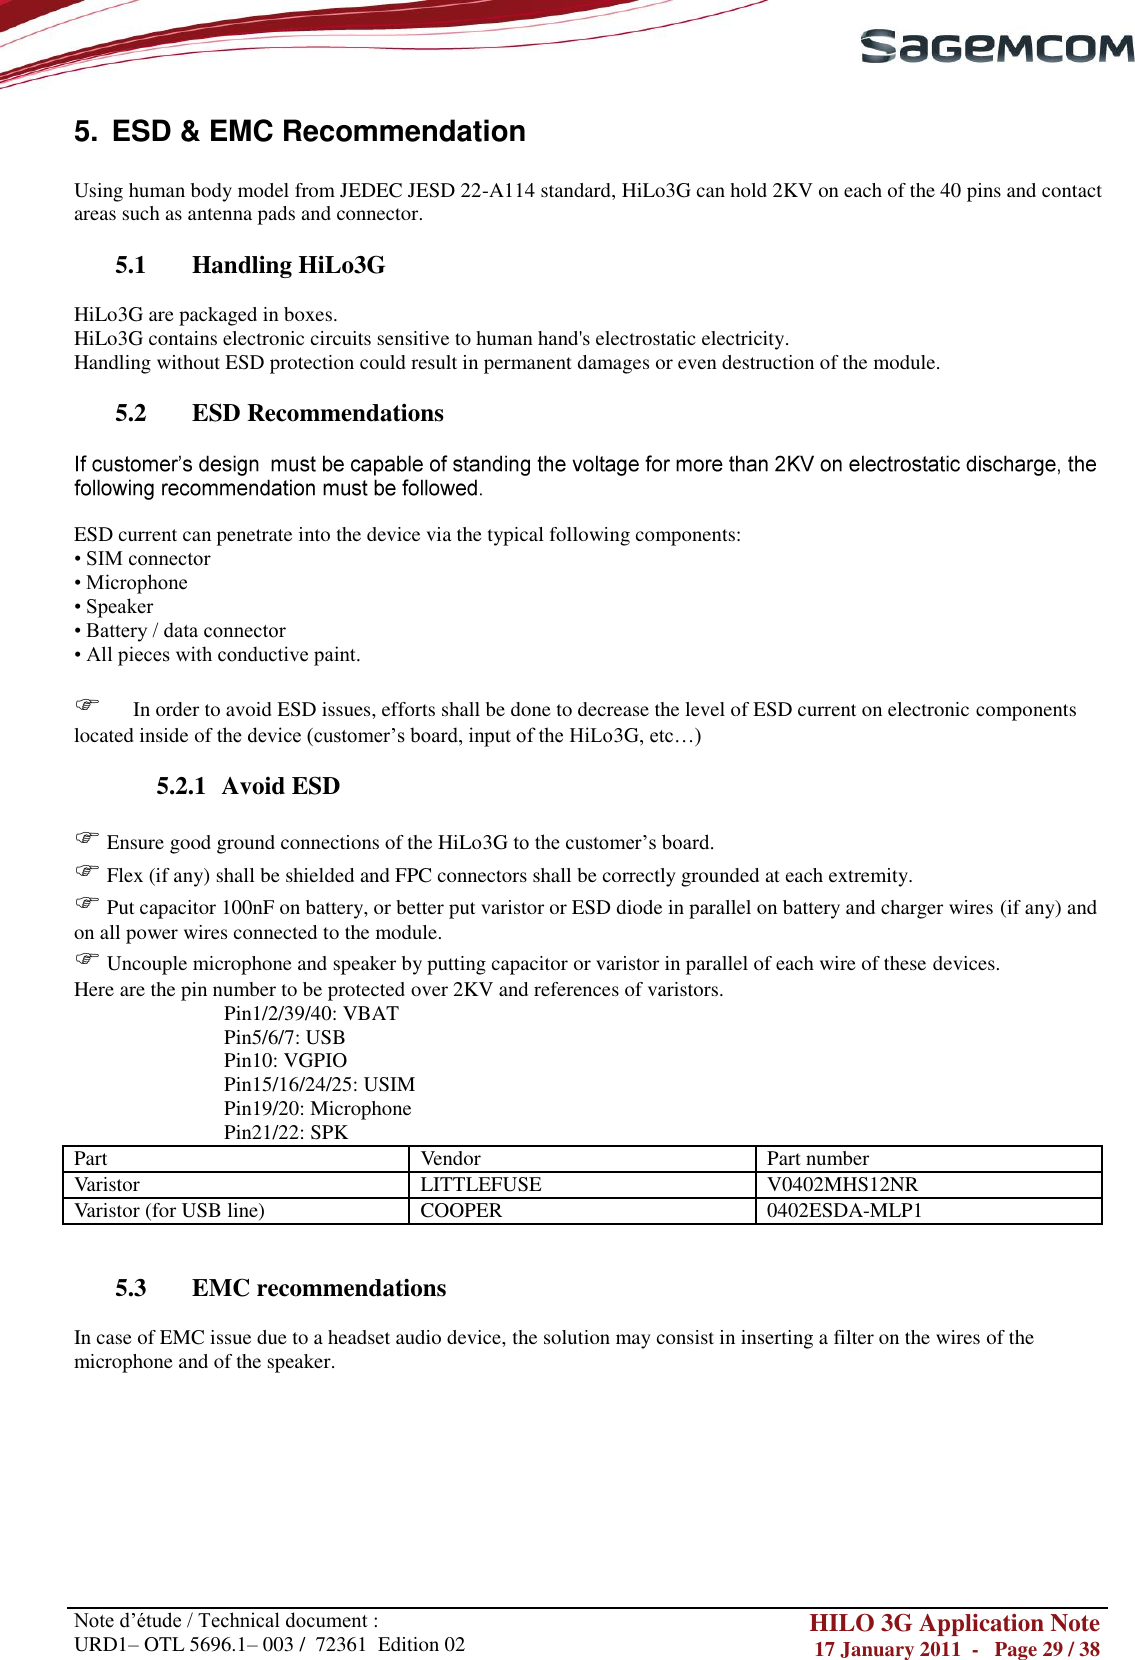       Note d‘étude / Technical document : URD1– OTL 5696.1– 003 /  72361  Edition 02 HILO 3G Application Note 17 January 2011  -   Page 29 / 38    5.  ESD &amp; EMC Recommendation  Using human body model from JEDEC JESD 22-A114 standard, HiLo3G can hold 2KV on each of the 40 pins and contact areas such as antenna pads and connector.  5.1 Handling HiLo3G  HiLo3G are packaged in boxes. HiLo3G contains electronic circuits sensitive to human hand&apos;s electrostatic electricity. Handling without ESD protection could result in permanent damages or even destruction of the module.  5.2 ESD Recommendations    ESD current can penetrate into the device via the typical following components: • SIM connector • Microphone • Speaker • Battery / data connector • All pieces with conductive paint.        In order to avoid ESD issues, efforts shall be done to decrease the level of ESD current on electronic components located inside of the device (customer‘s board, input of the HiLo3G, etc…)  5.2.1 Avoid ESD   Ensure good ground connections of the HiLo3G to the customer‘s board.  Flex (if any) shall be shielded and FPC connectors shall be correctly grounded at each extremity.  Put capacitor 100nF on battery, or better put varistor or ESD diode in parallel on battery and charger wires (if any) and on all power wires connected to the module.  Uncouple microphone and speaker by putting capacitor or varistor in parallel of each wire of these devices. Here are the pin number to be protected over 2KV and references of varistors. Pin1/2/39/40: VBAT Pin5/6/7: USB Pin10: VGPIO Pin15/16/24/25: USIM Pin19/20: Microphone Pin21/22: SPK Part Vendor Part number Varistor LITTLEFUSE V0402MHS12NR Varistor (for USB line) COOPER 0402ESDA-MLP1   5.3 EMC recommendations  In case of EMC issue due to a headset audio device, the solution may consist in inserting a filter on the wires of the microphone and of the speaker.         